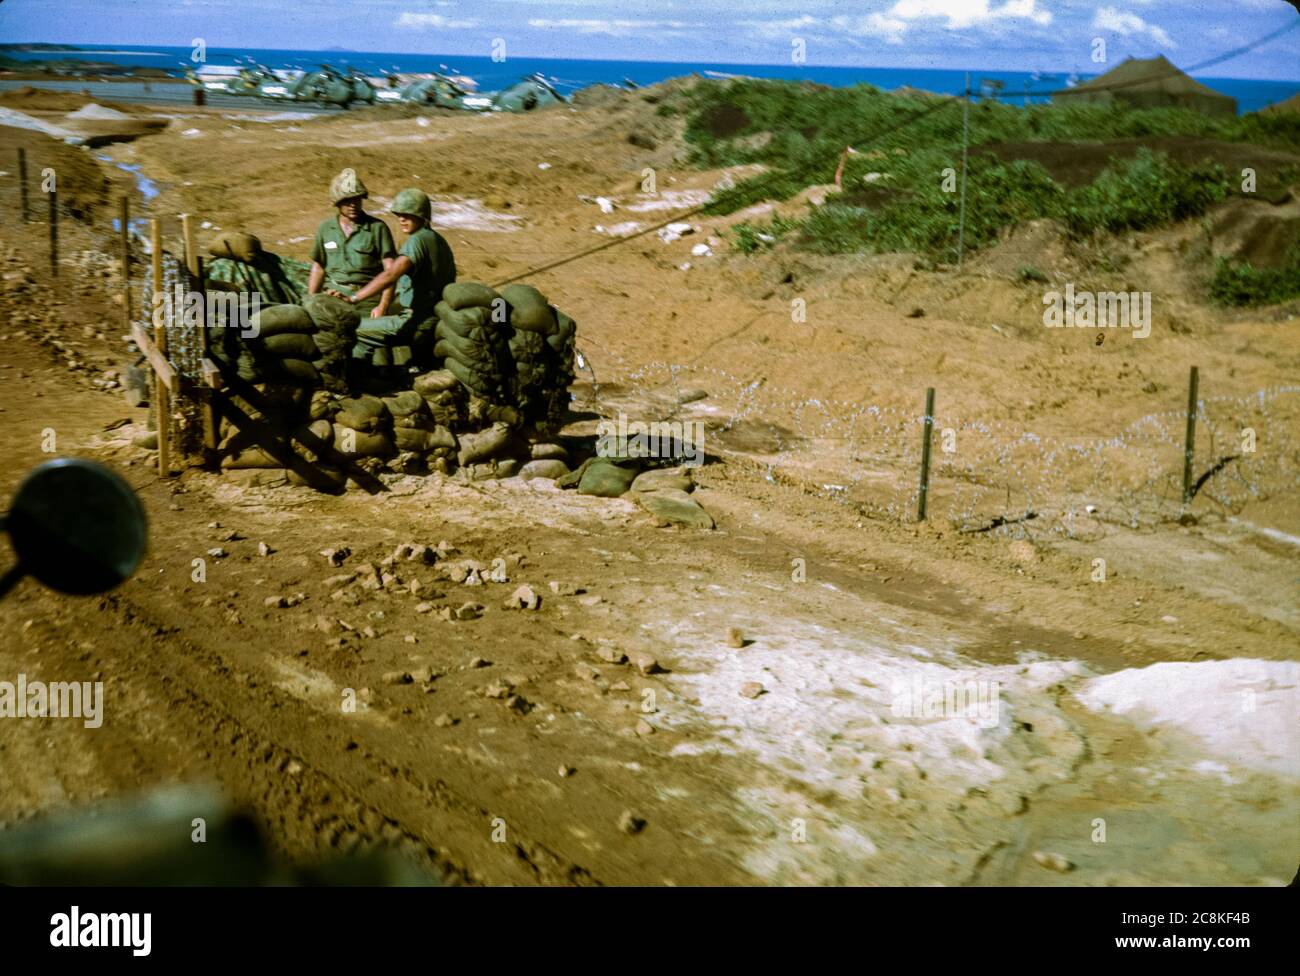 United States Marines man a check point near a helicopter landing pad in 1965 during the Vietnam War. Stock Photo